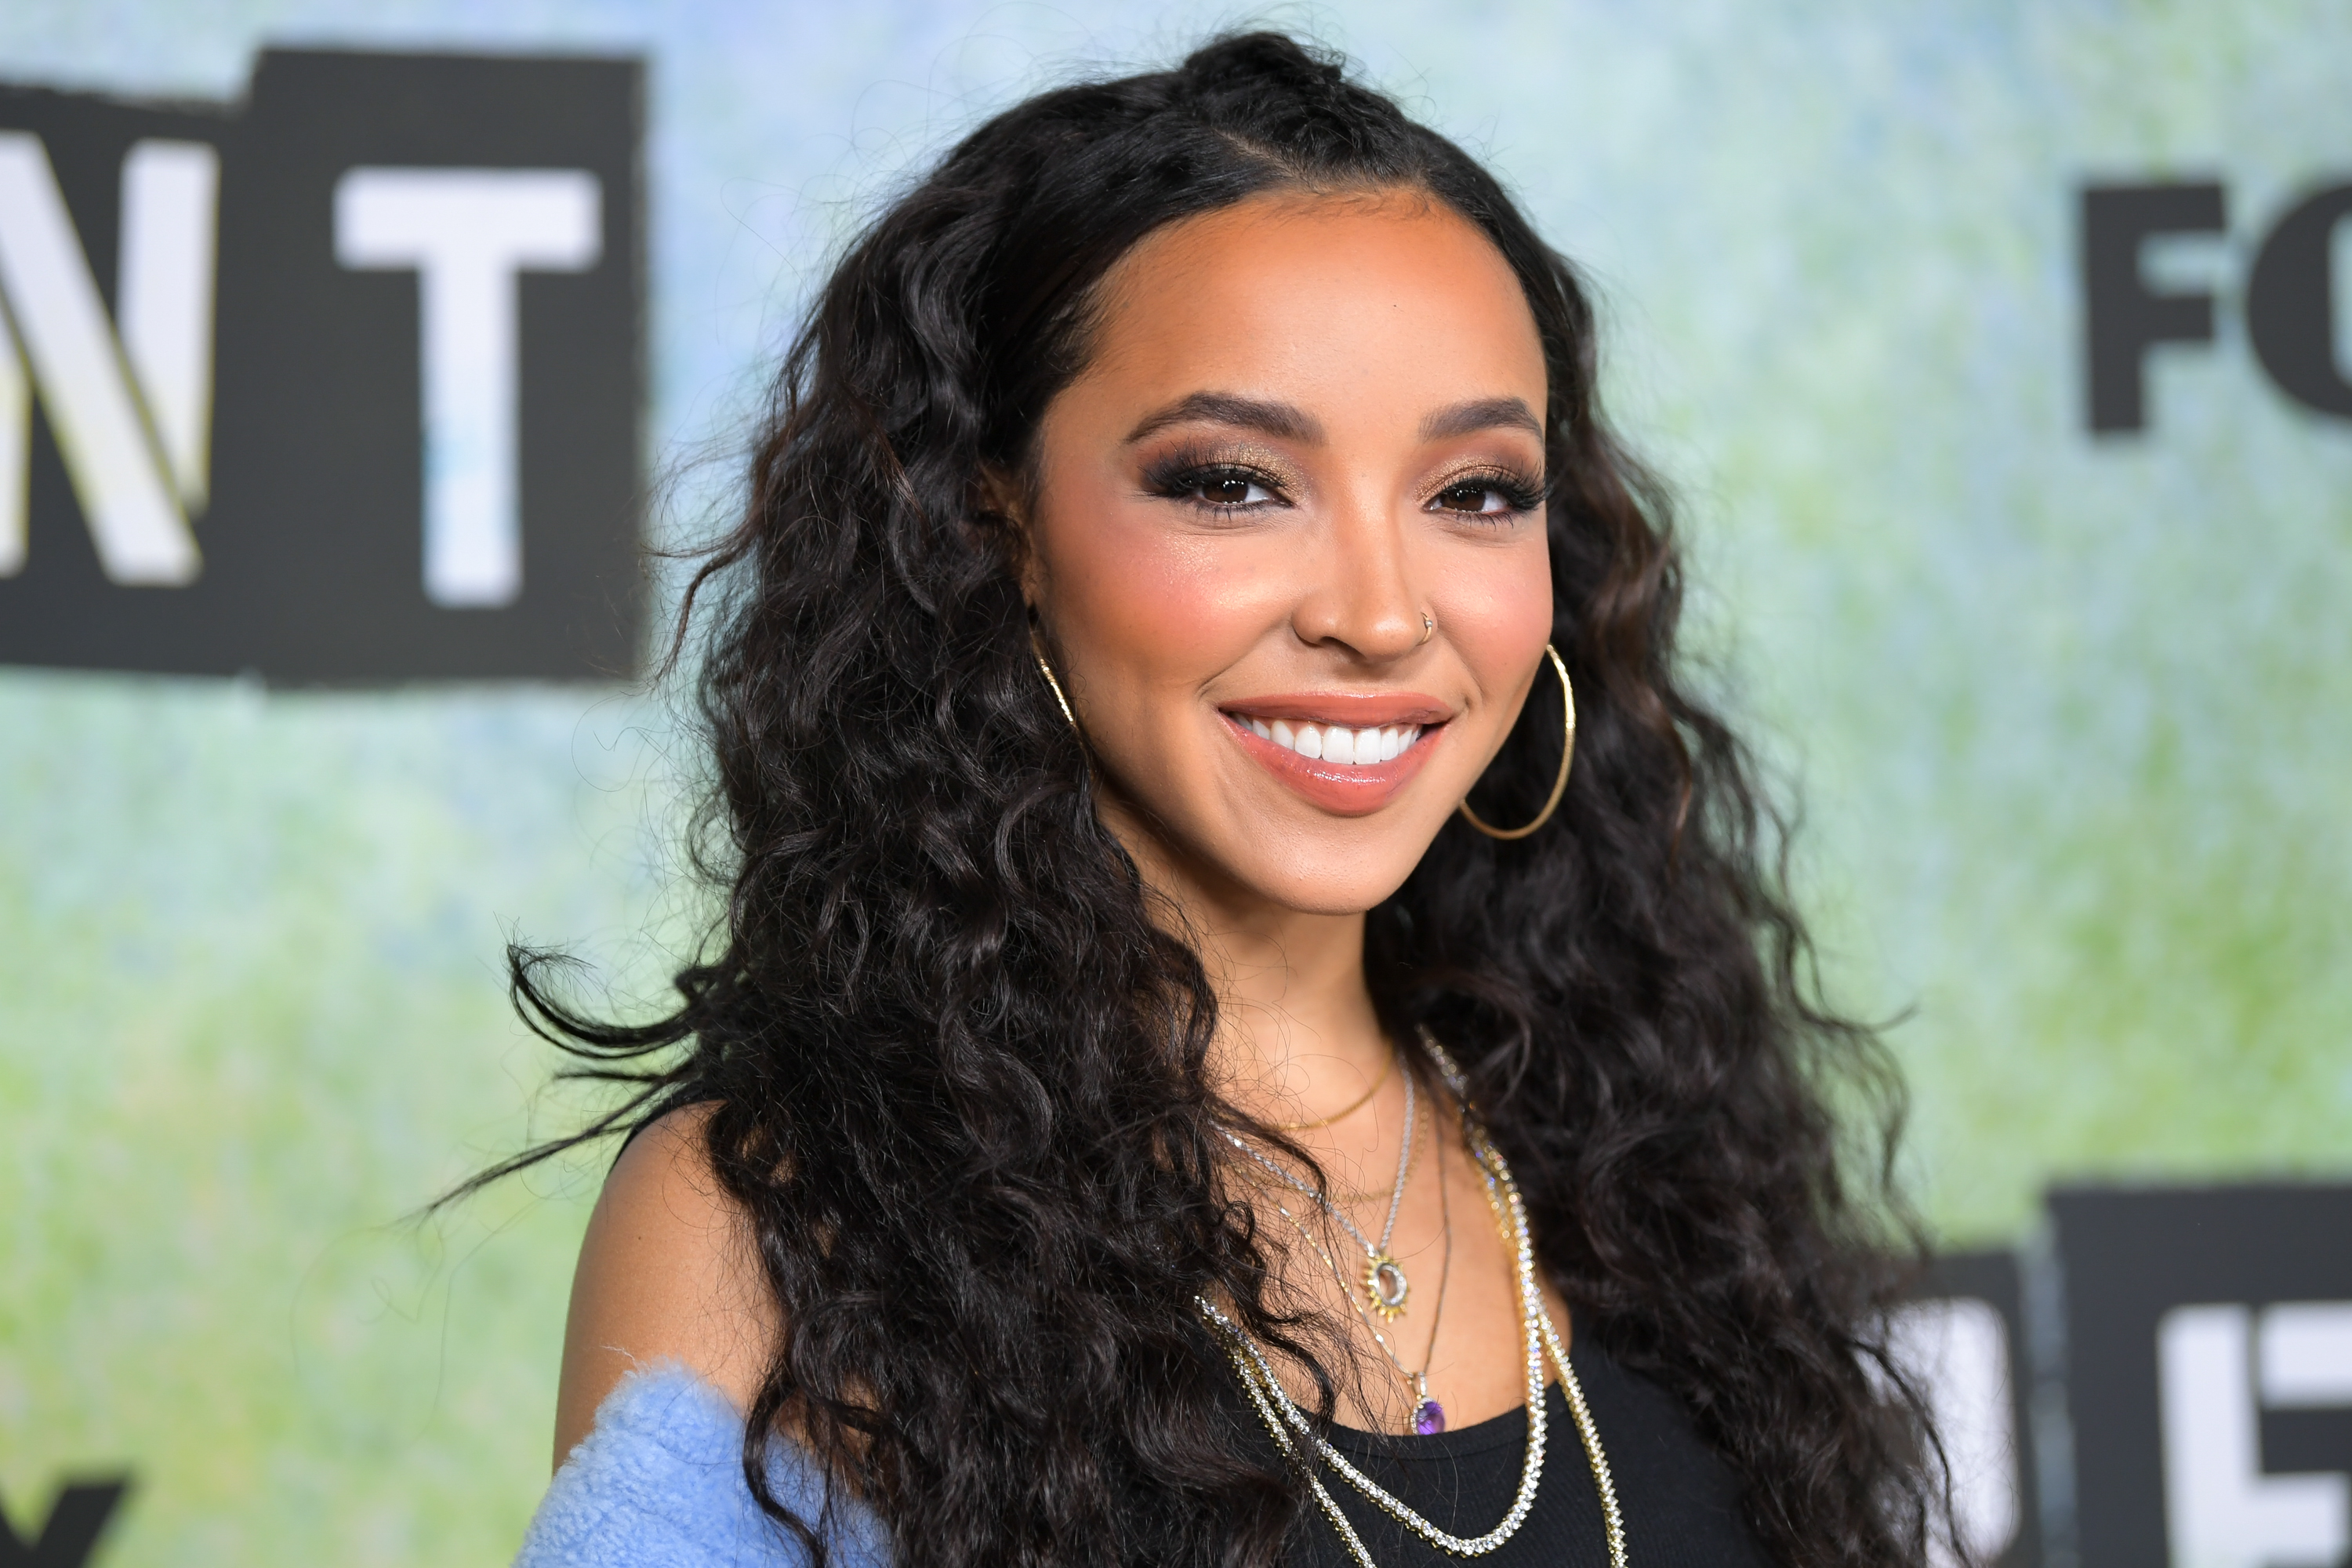 Does Tinashe Identify as Bisexual?